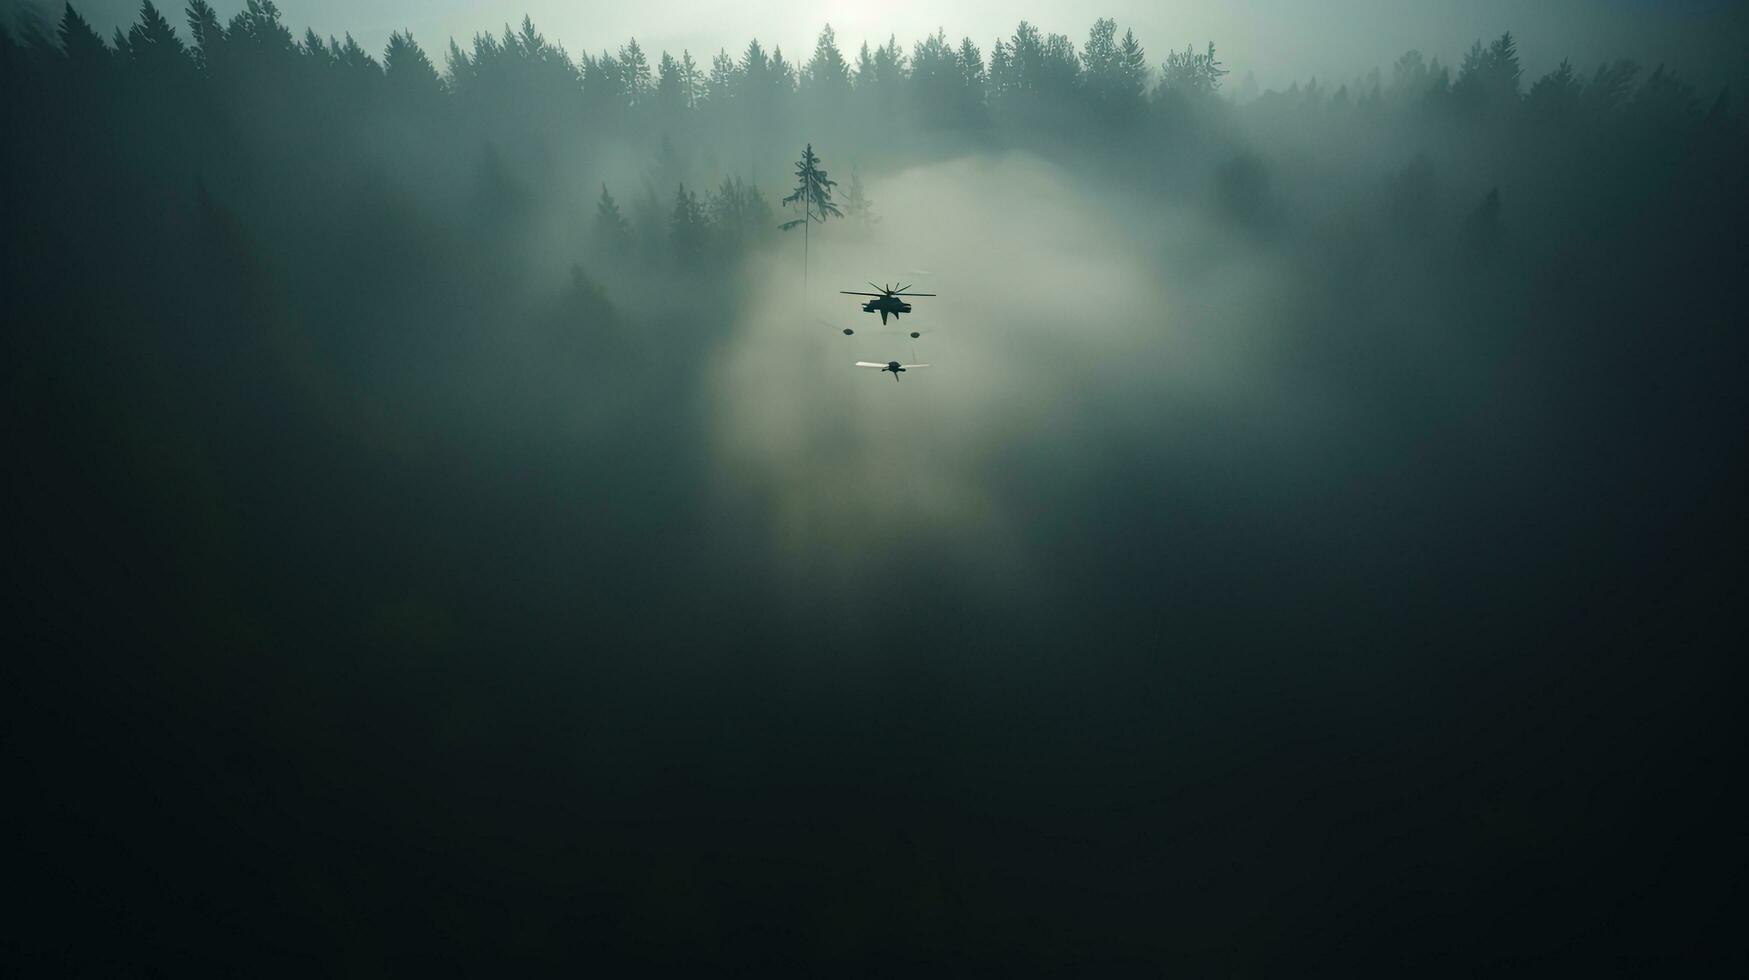 Early morning sunlight illuminates thick atmospheric fog enveloping a forest of trees as viewed from above by a drone. silhouette concept photo